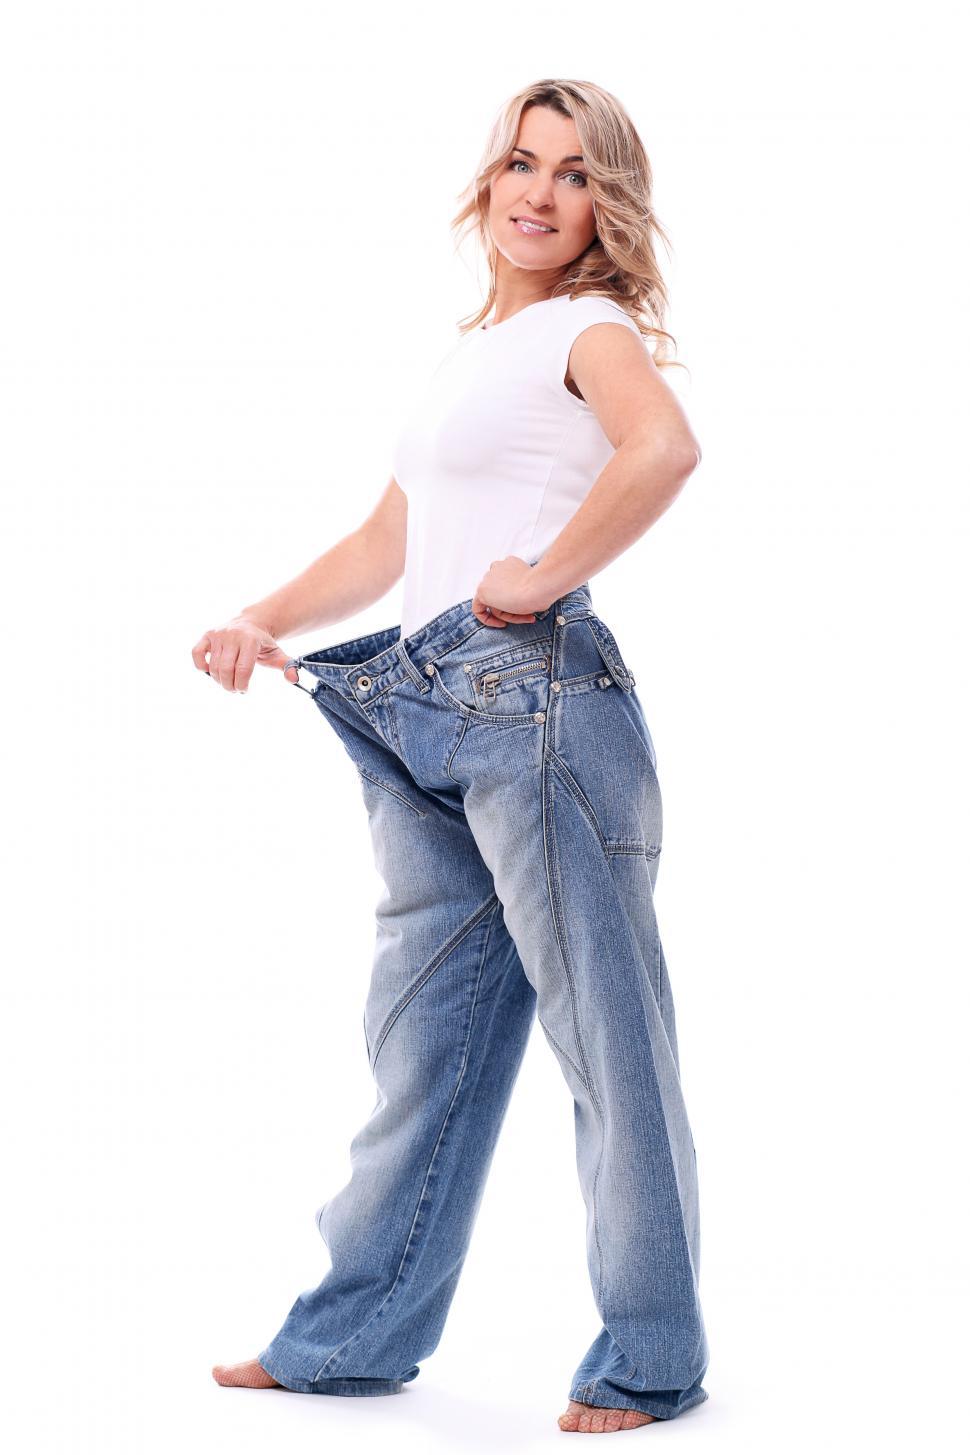 Free Image of Weight Loss - wearing jeans from before 